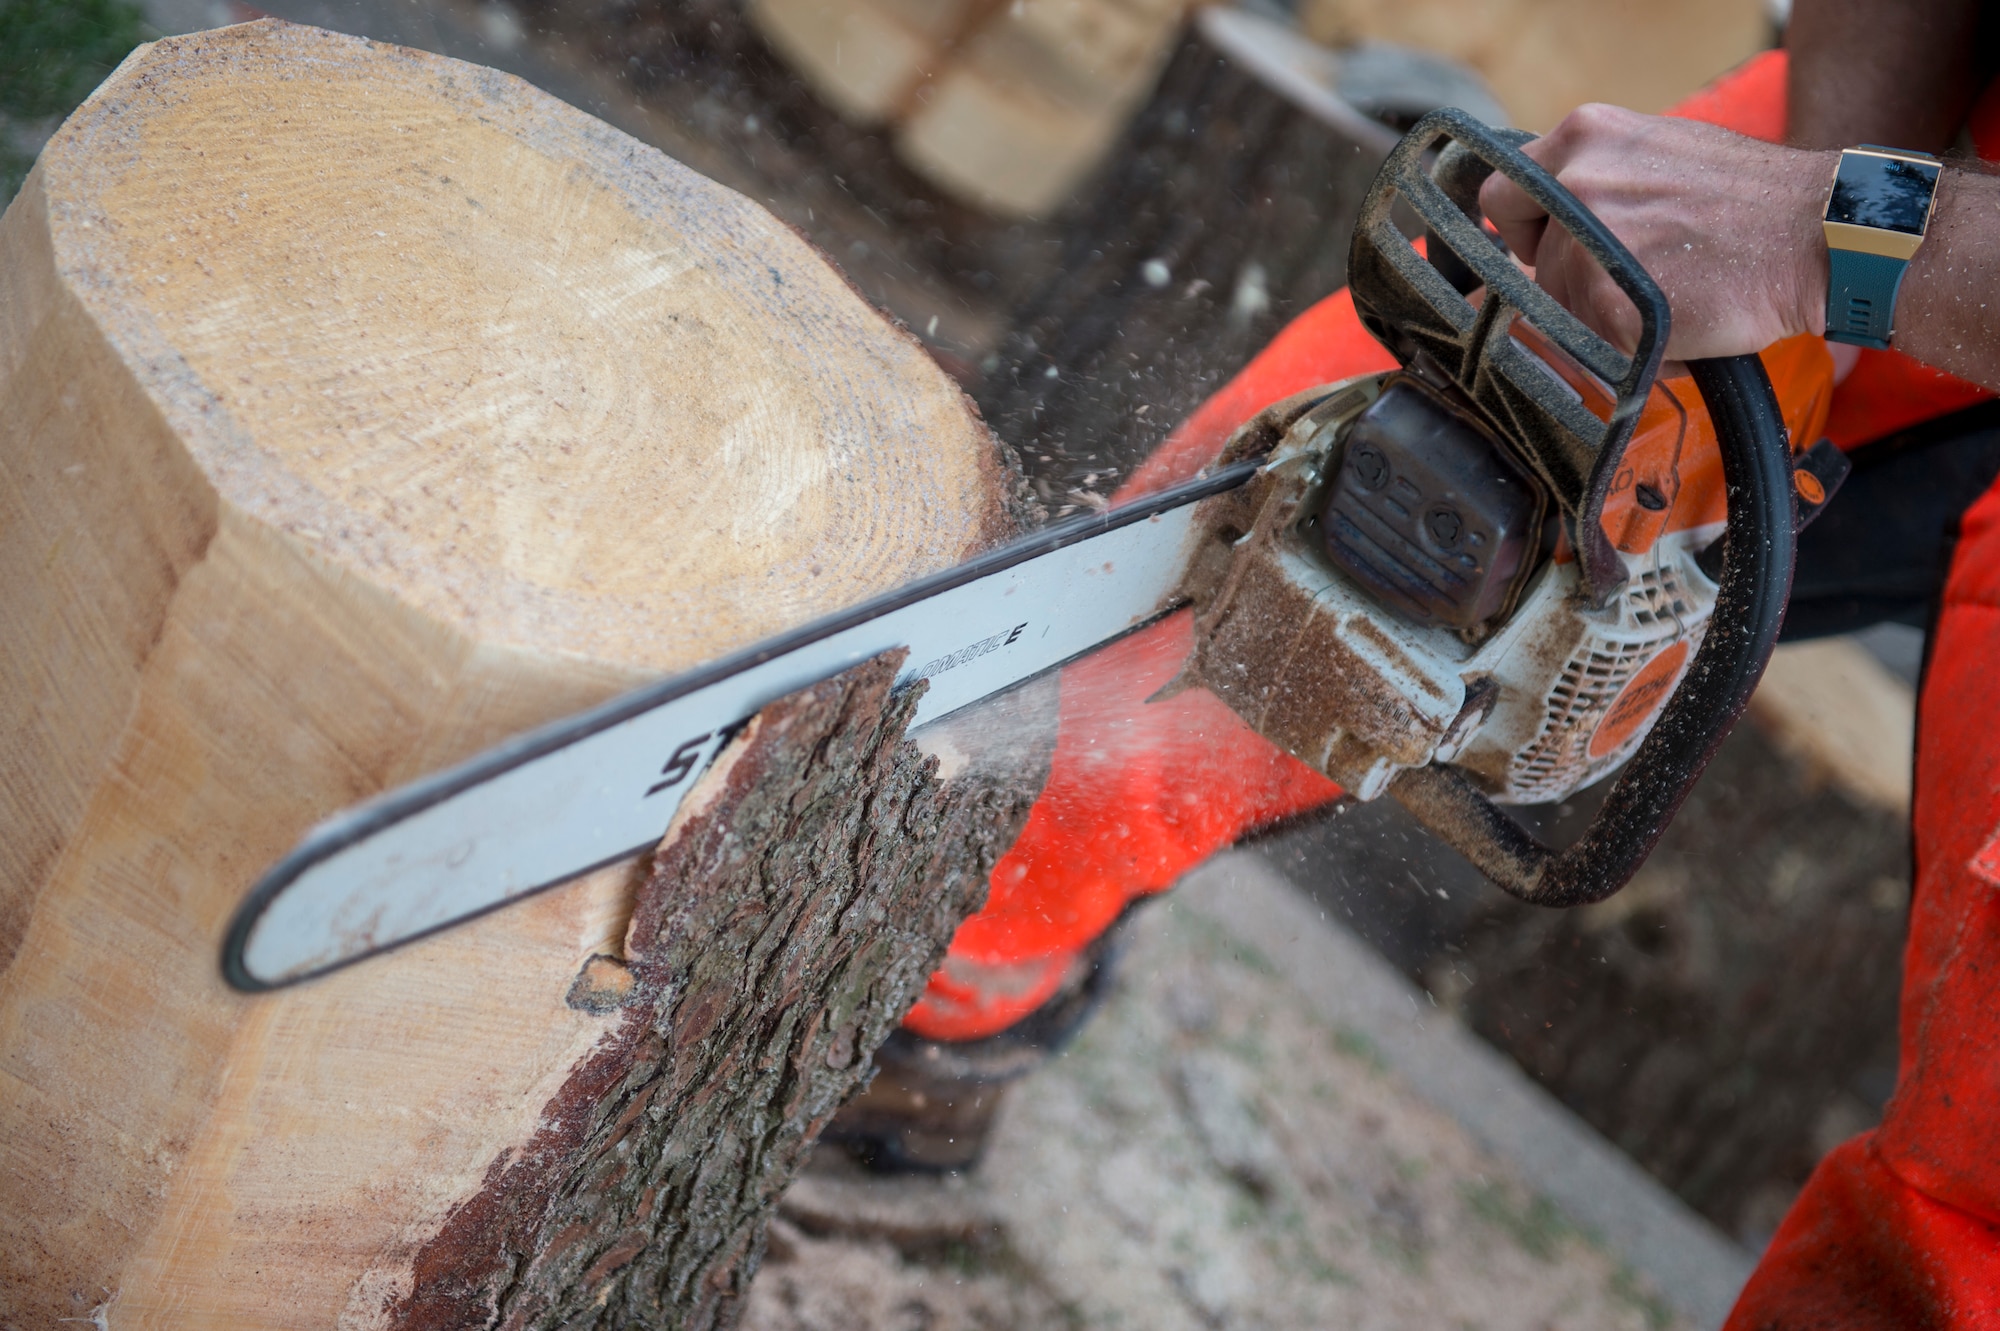 U.S. Air Force Tech. Sgt. Scott Herbert, 818th Mobility Support Advisory Squadron air advisor, cuts off bark from a log to prepare it for carving an art piece March 12, 2020, at his house on Joint Base McGuire-Dix-Lakehurst, New Jersey. Herbert has three chainsaws to work different cuts and details into his art. (U.S. Air Force photo by Staff Sgt. Sarah Brice)